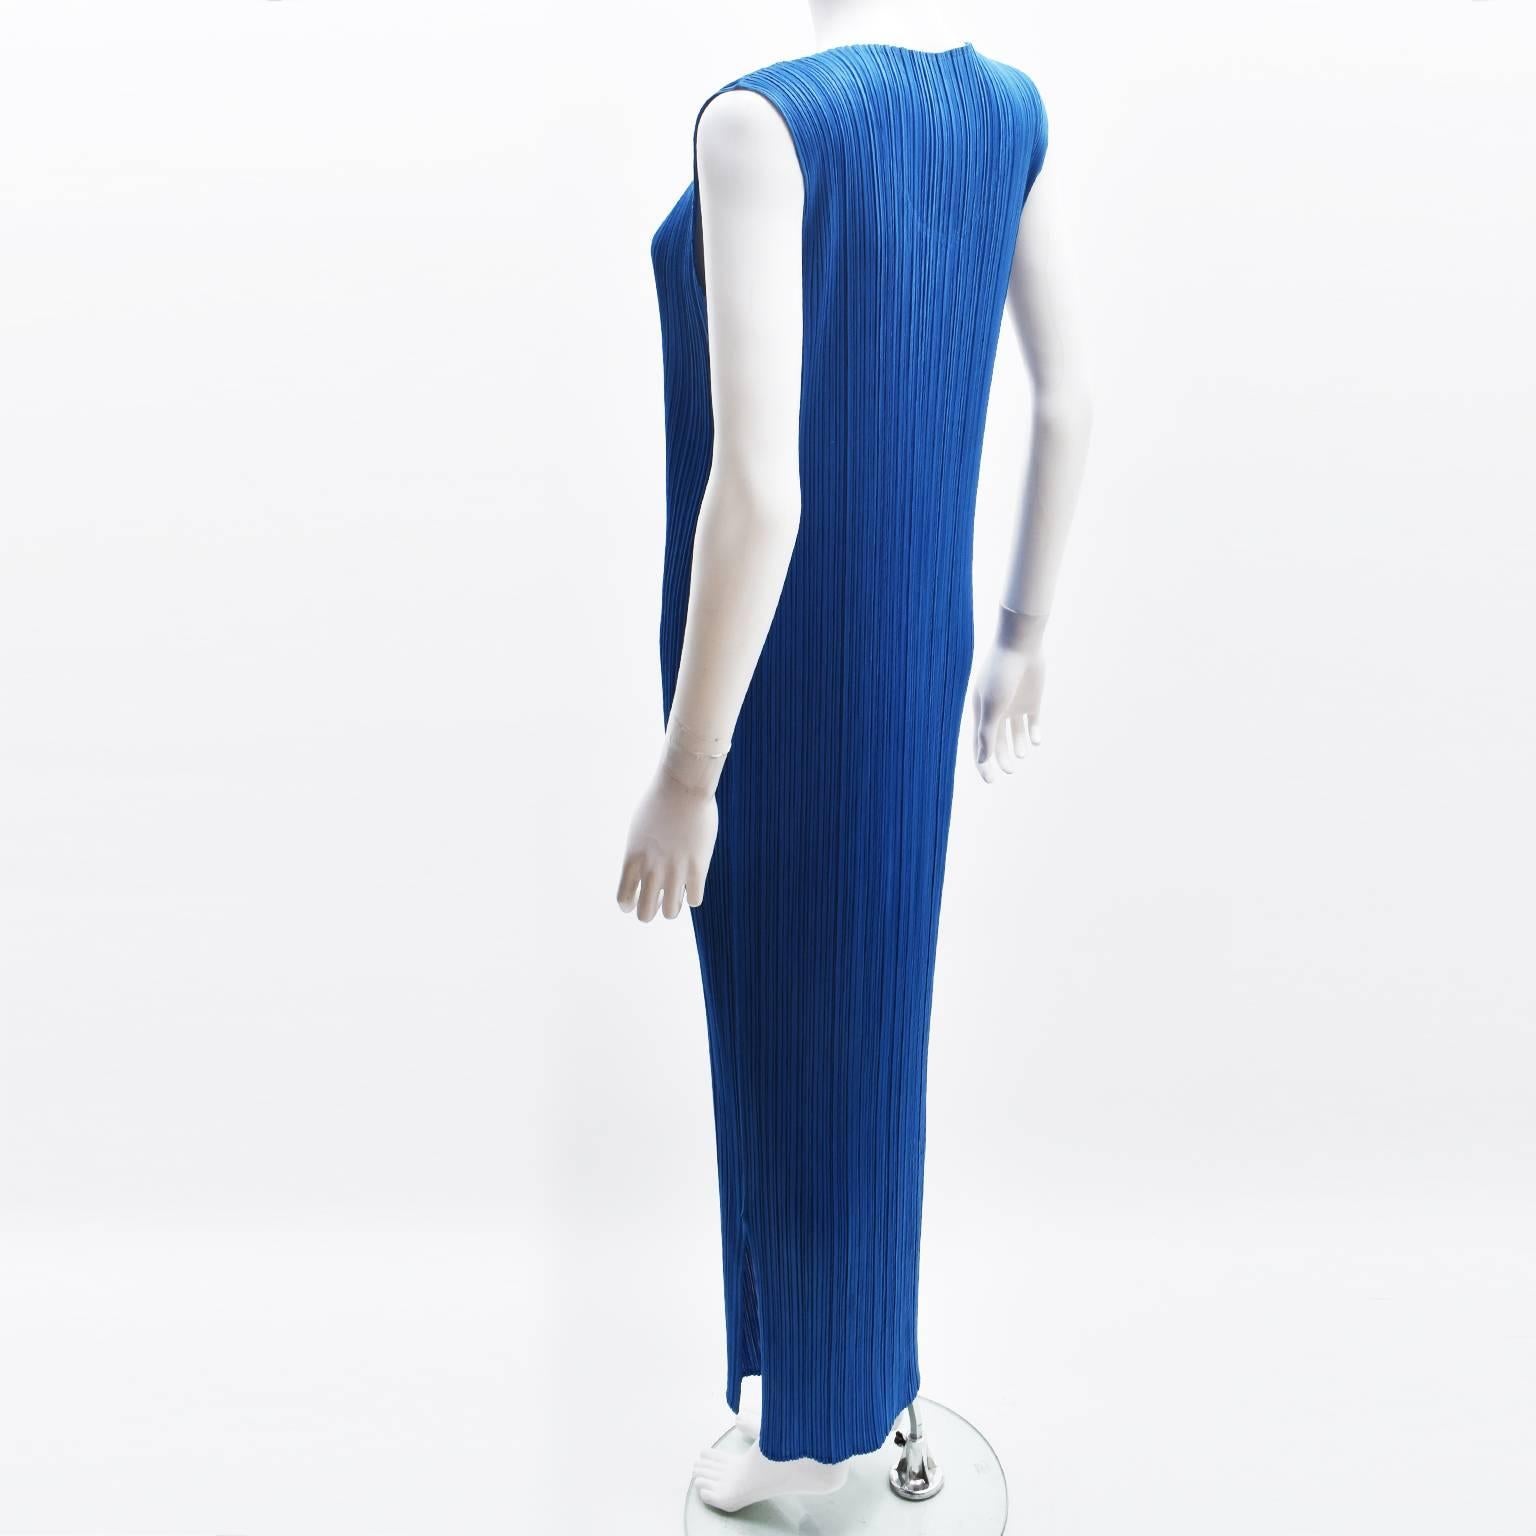 A stunning and bright electric blue pleated dress from Issey Miyake's PLEATS PLEASE line. The dress has a very simple long shape that falls just above the ankle, straight shape, sleeveless cut and round neckline. It is made from Miyake's signature